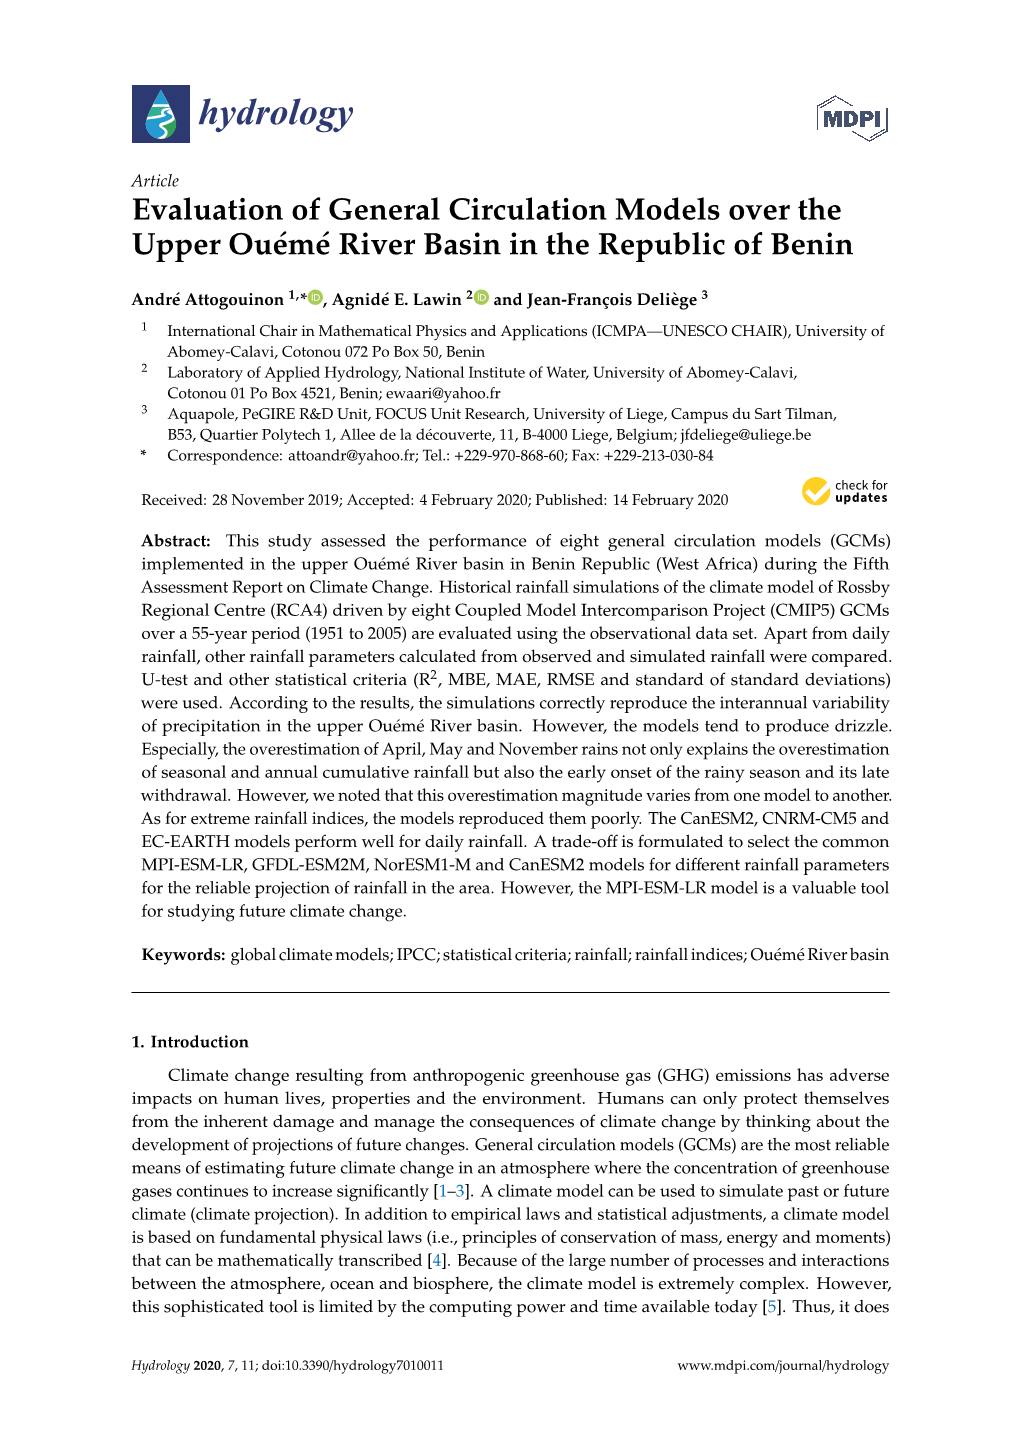 Evaluation of General Circulation Models Over the Upper Ouémé River Basin in the Republic of Benin